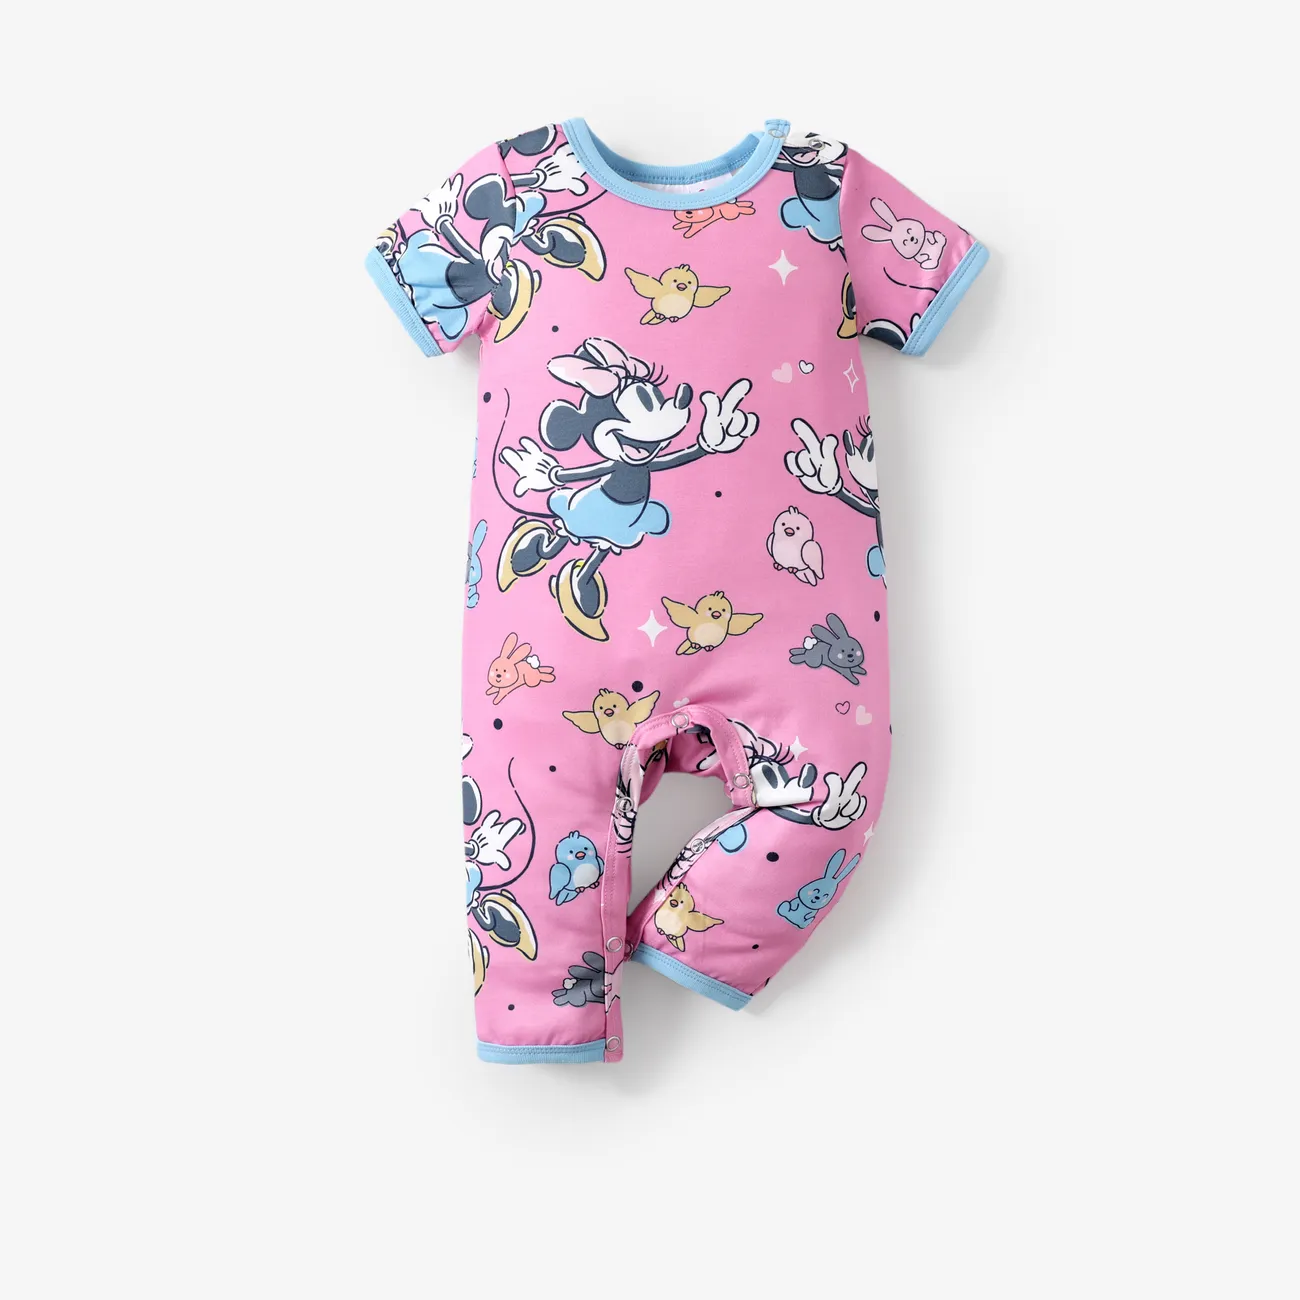 Disney Mickey and Friends 1pc Baby Girls/Boys Naia™ Character All-Over Print with Short Sleeve Jumpsuit Pink big image 1